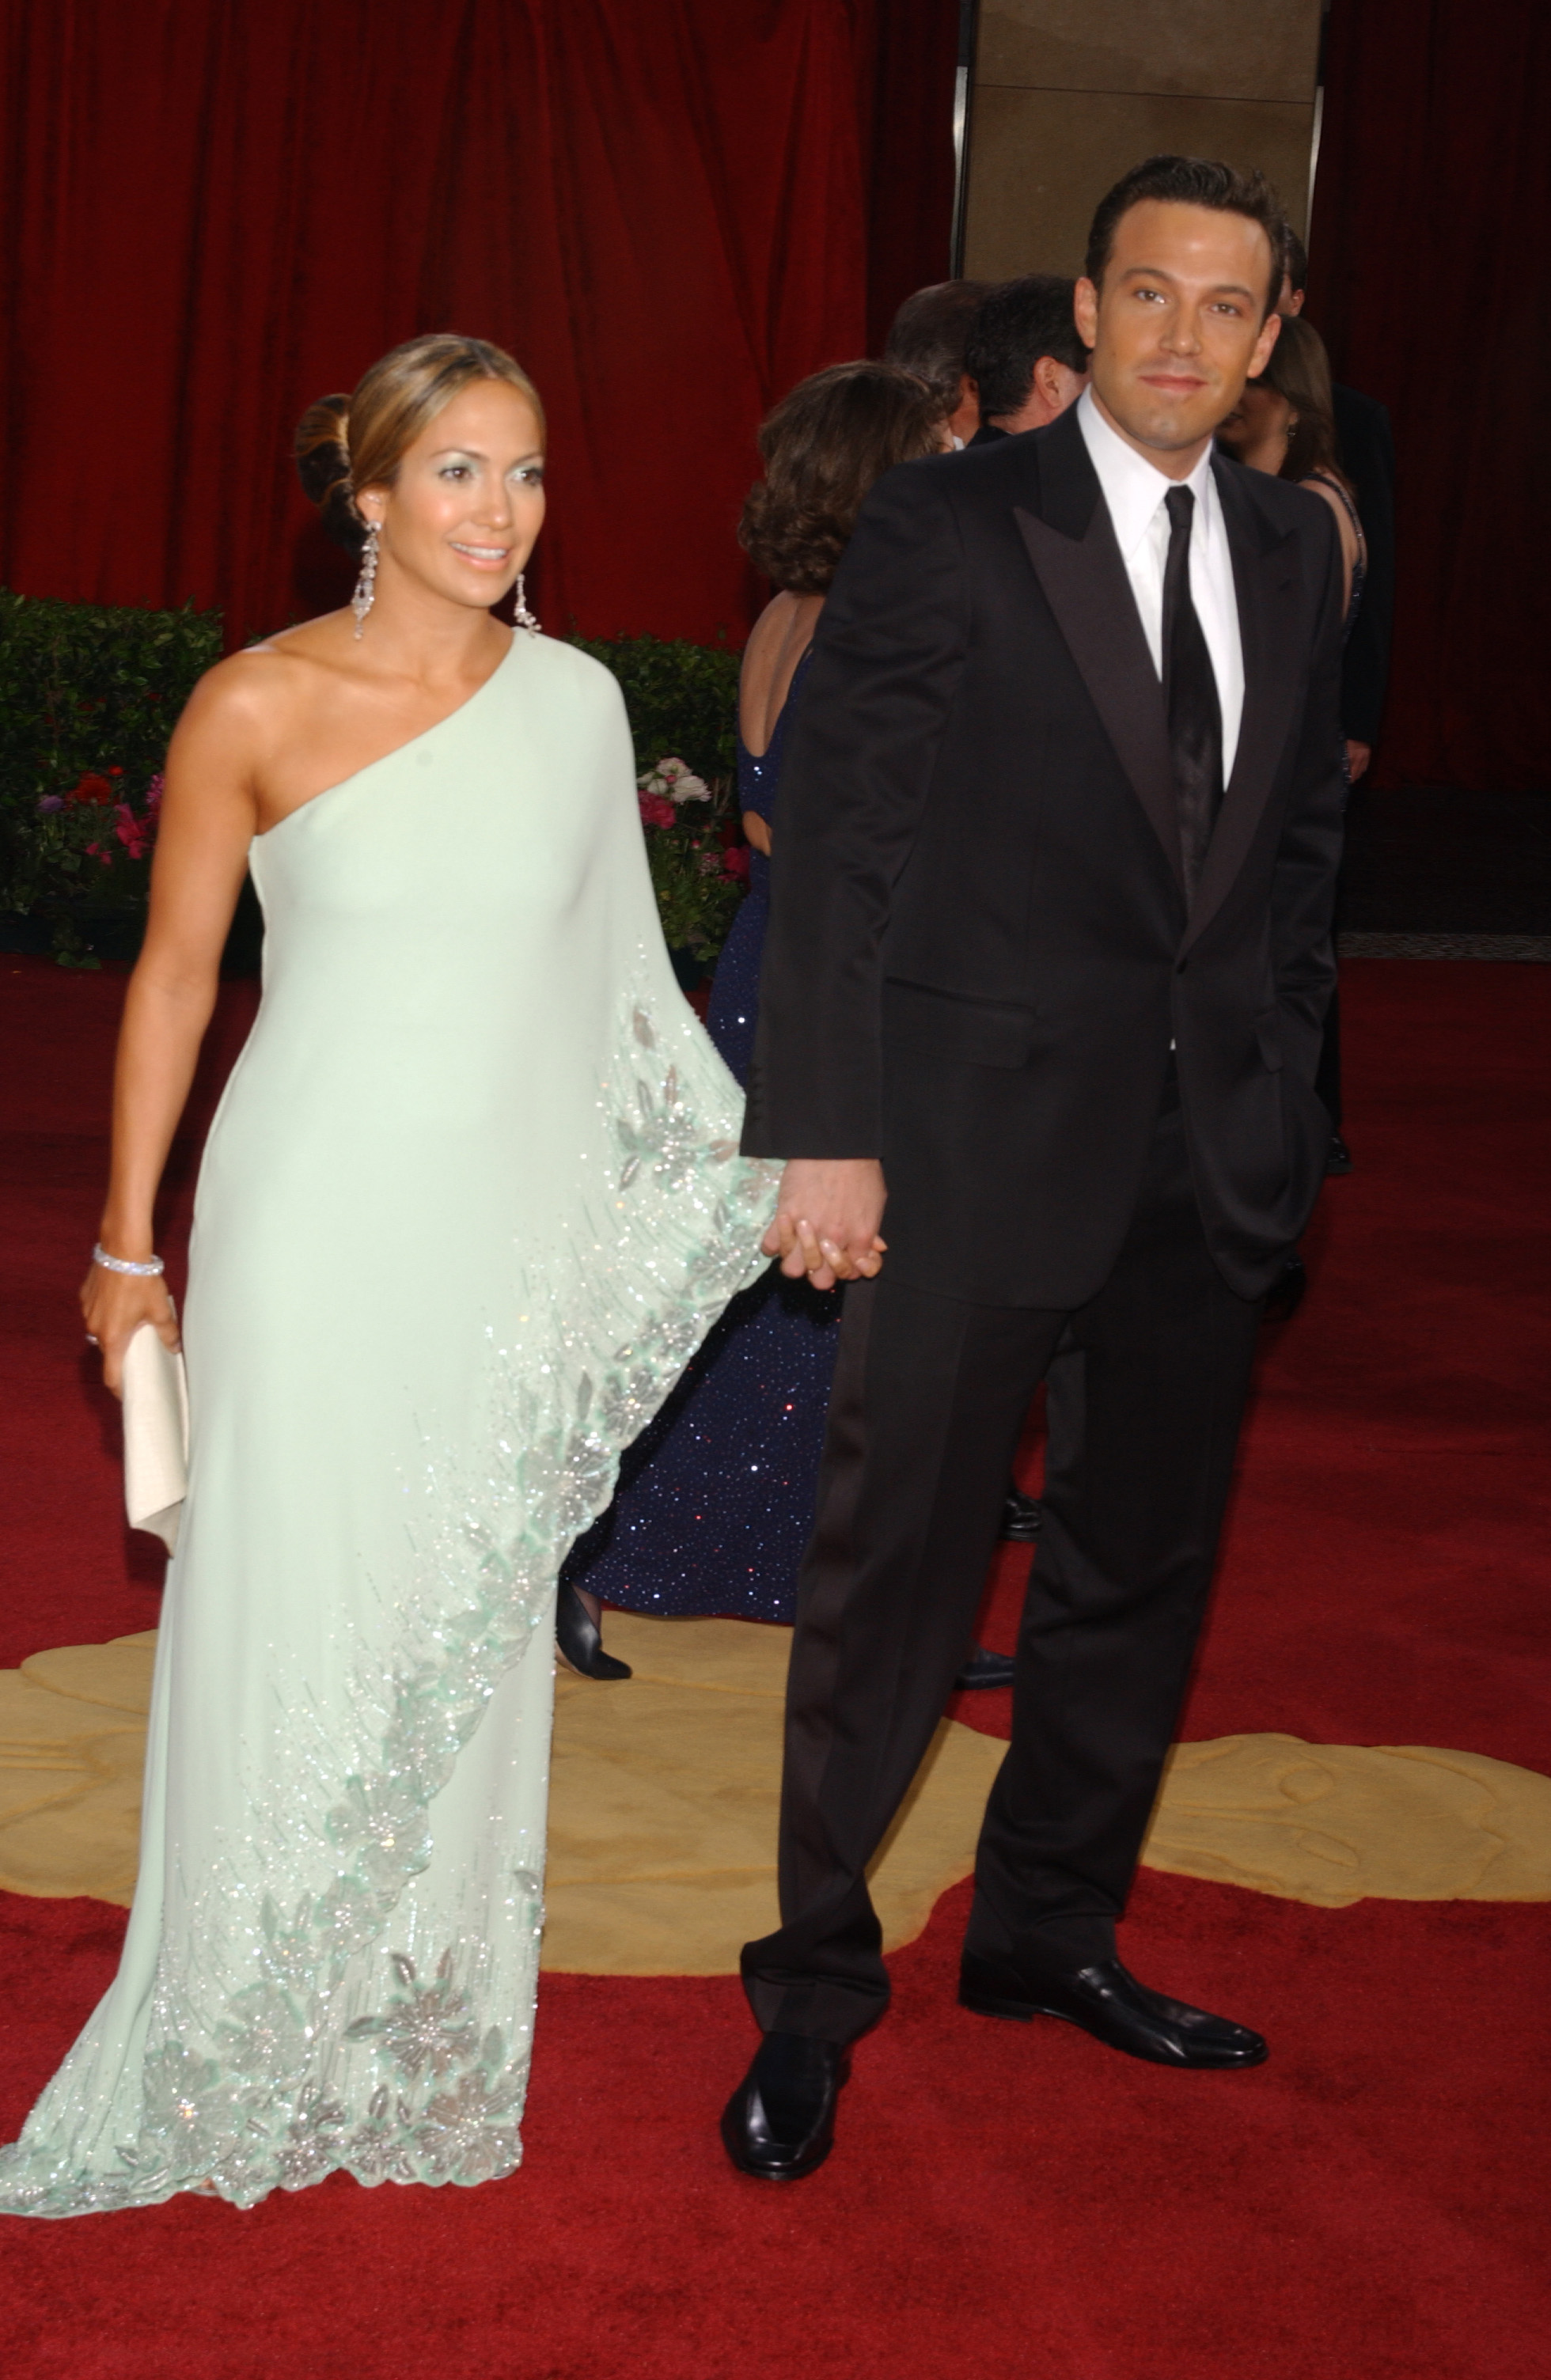 Jennifer Lopez and Ben Affleck at the 75th Annual Academy Awards in 2003 | Source: Getty Images